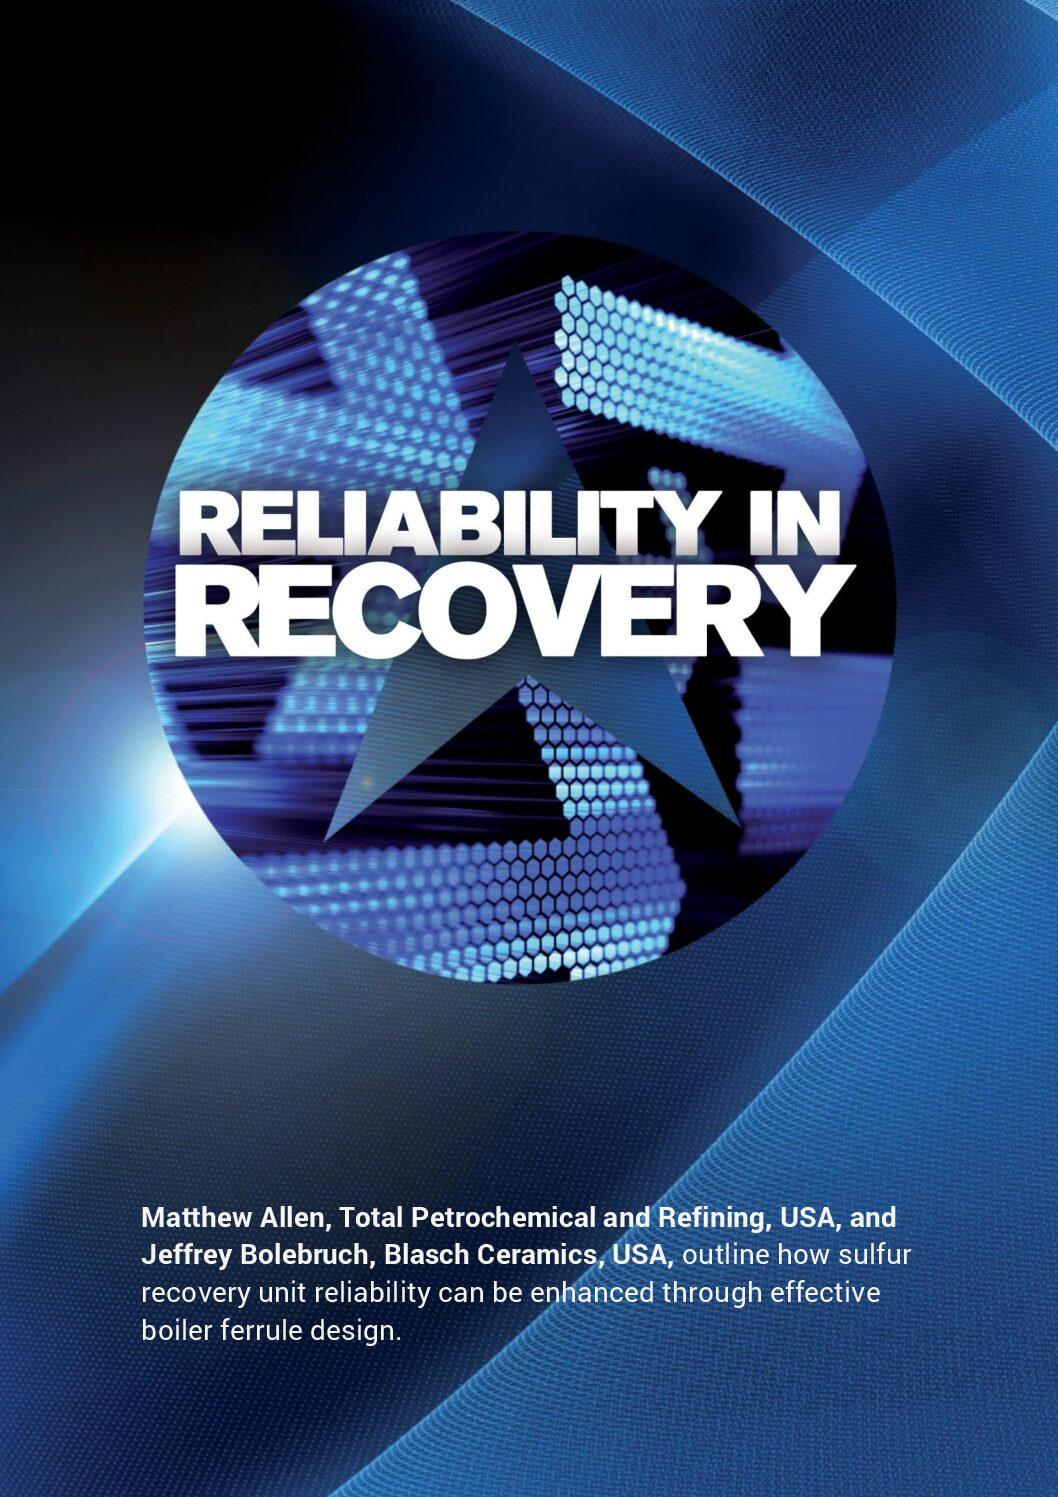 Cover page of "Reliability in Recovery" article.